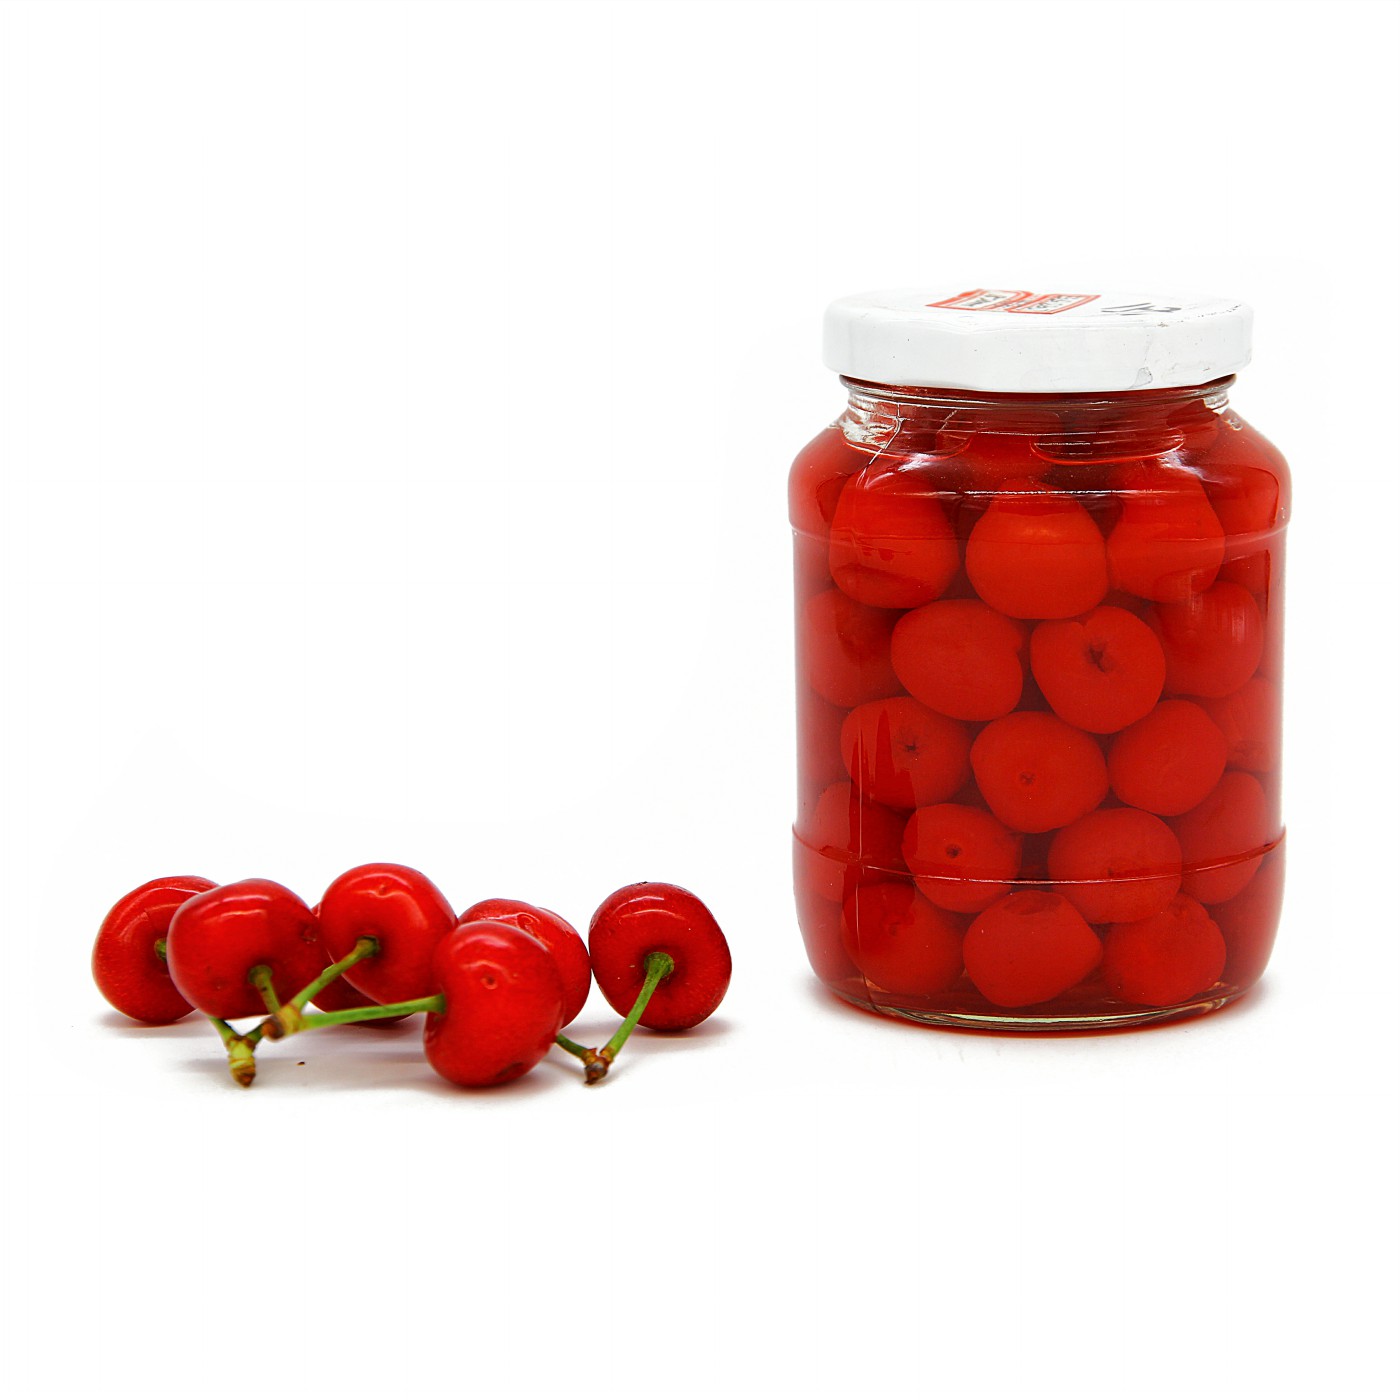 Canned Cherry